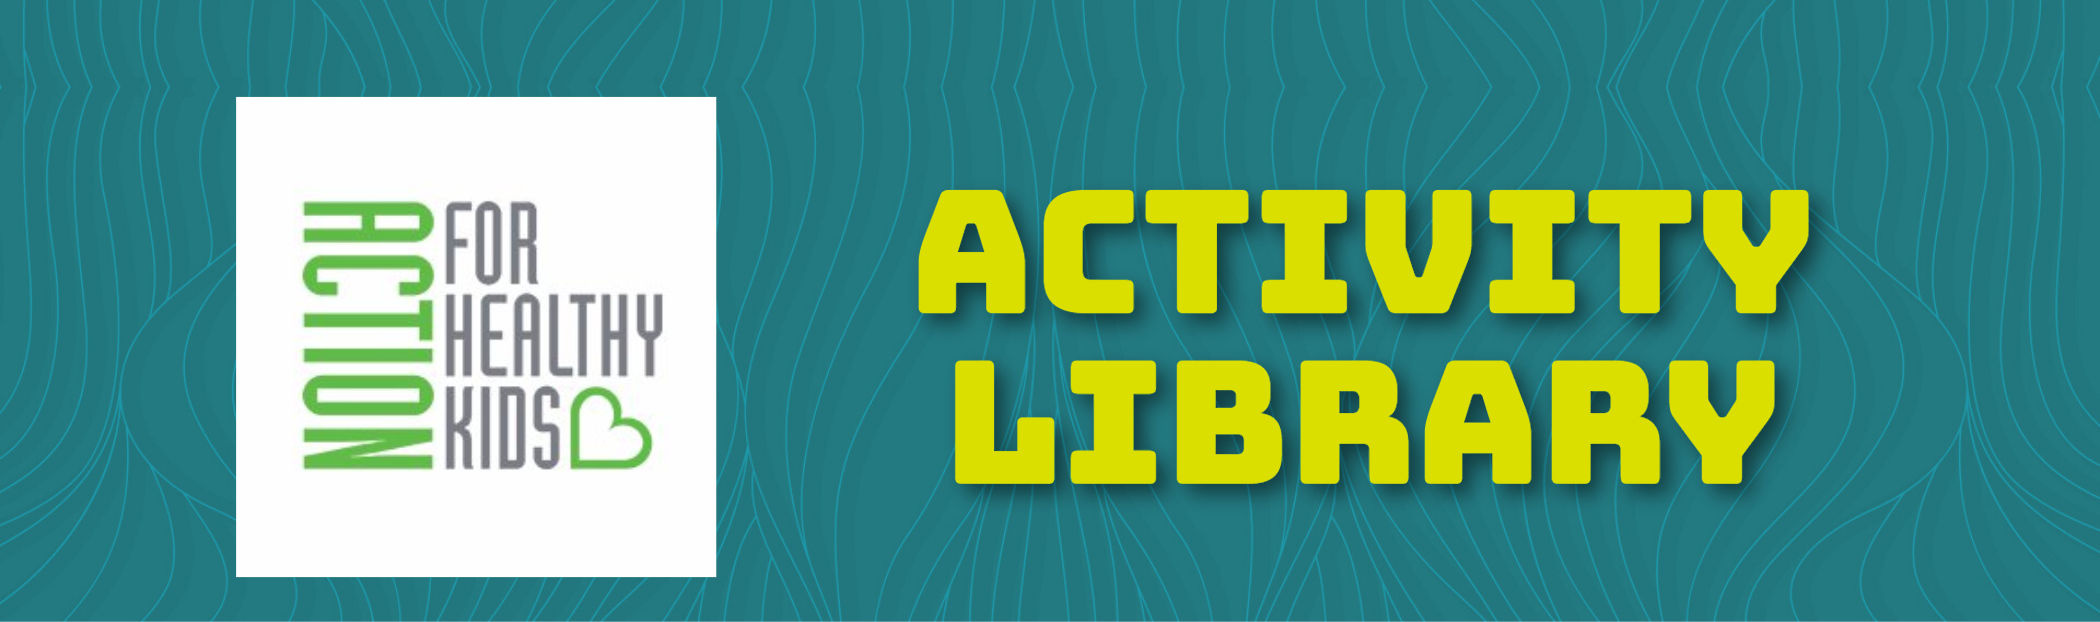 ACTIVITY LIBRARY